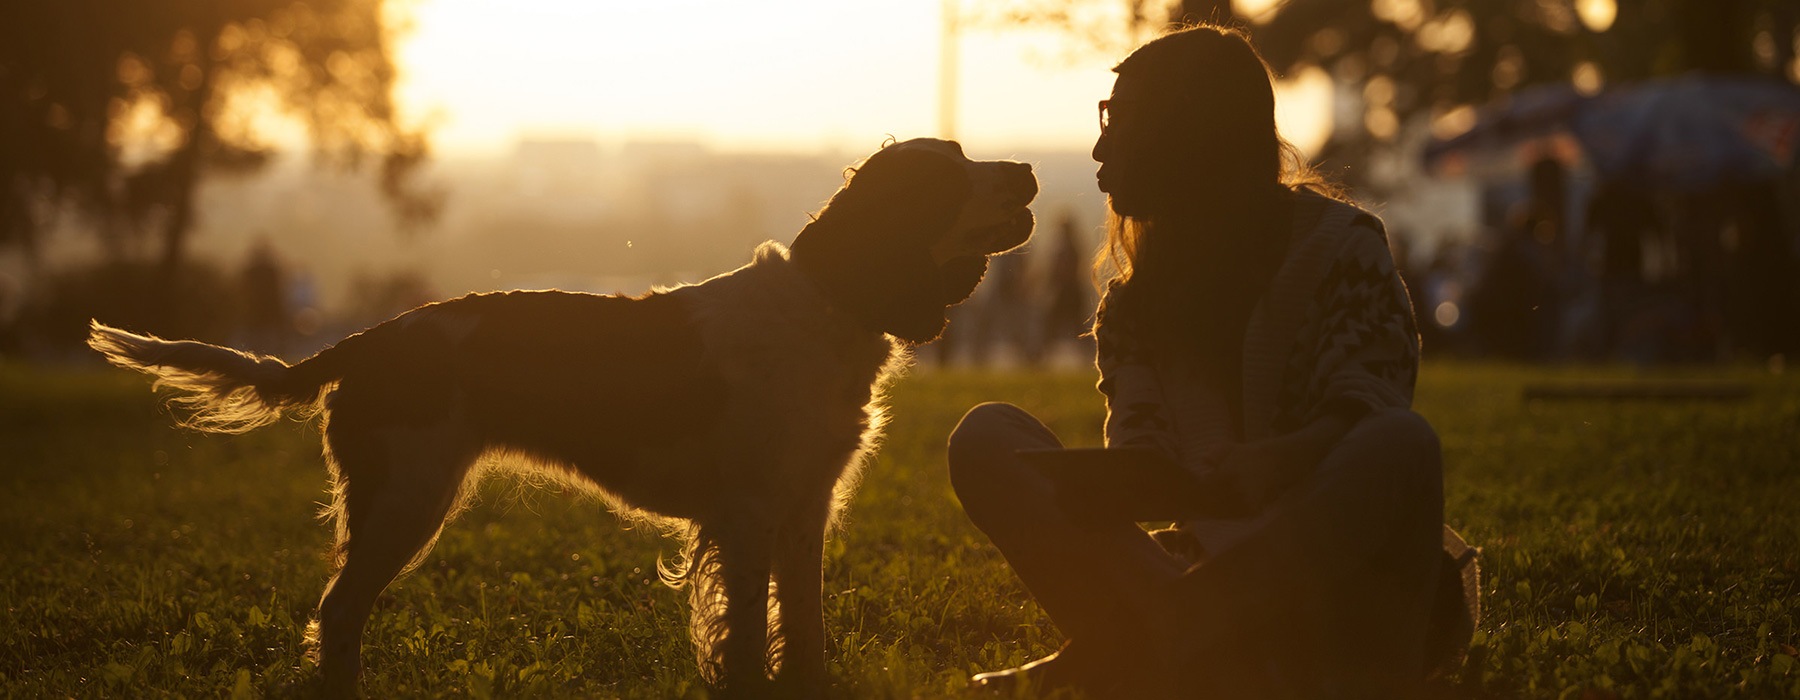 lifestyle image of a woman with a dog outdoors at sunset